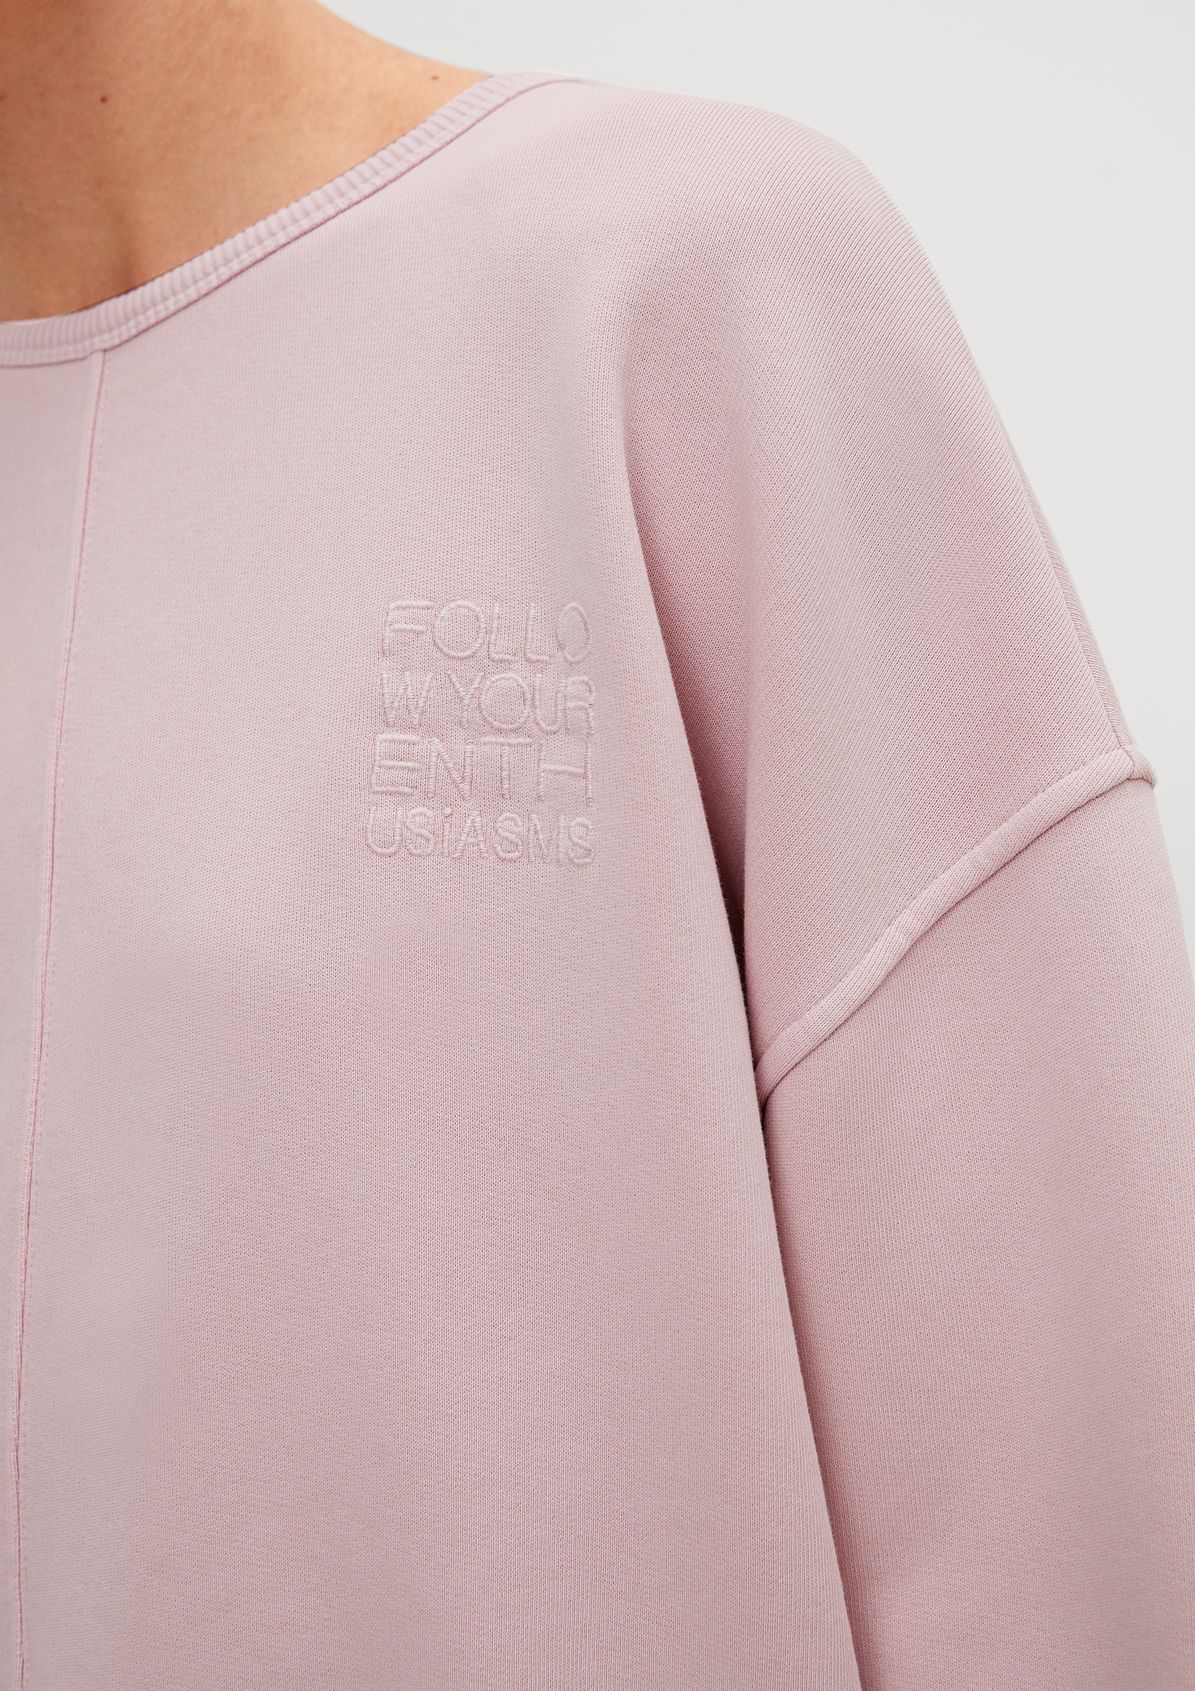 Sweatshirt with embroidery from comma